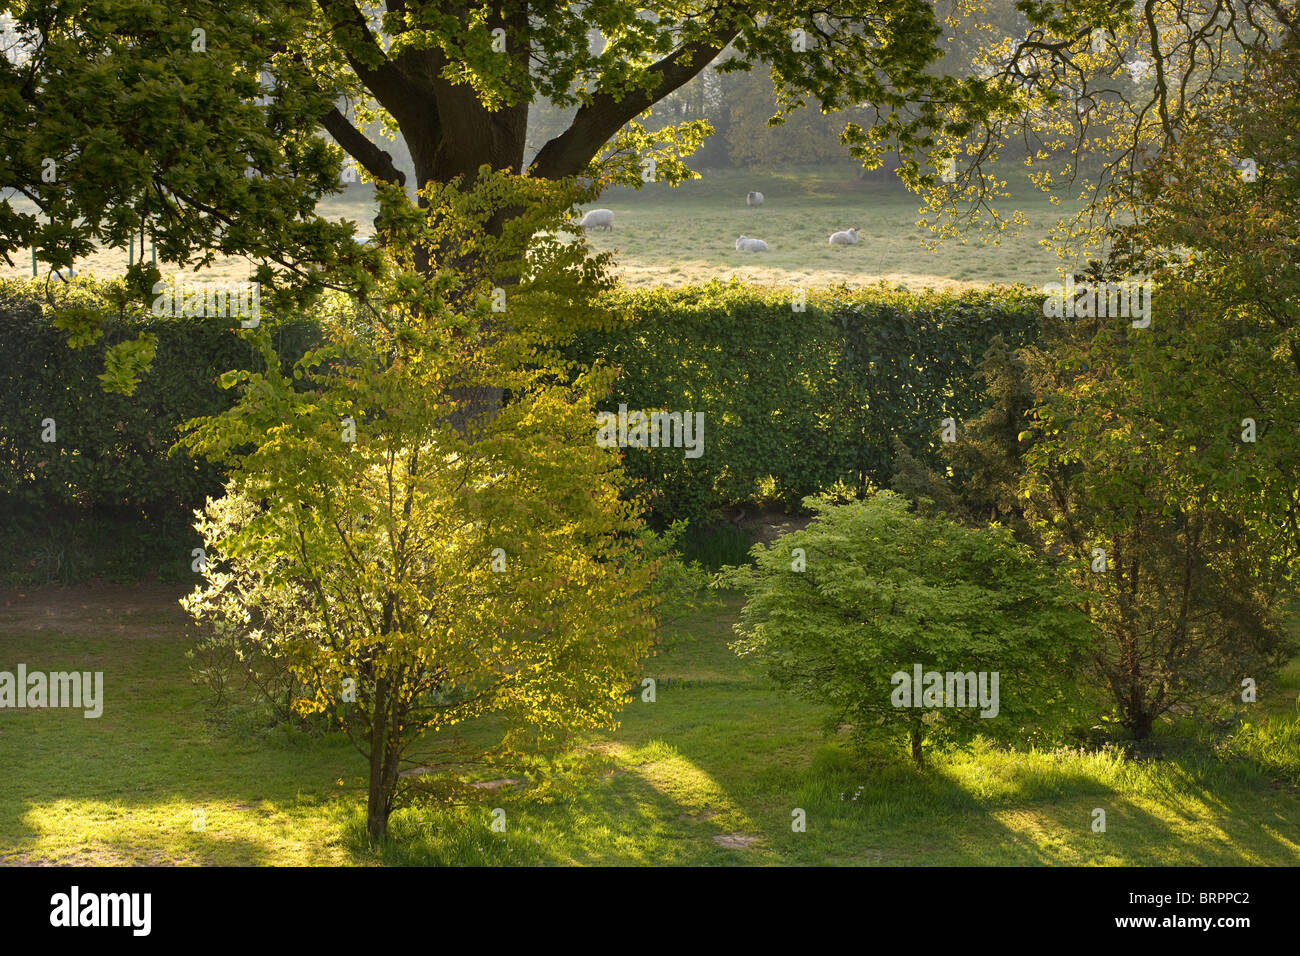 Large country garden with shrubs, trees and field with sheep, Sussex, England, UK Stock Photo